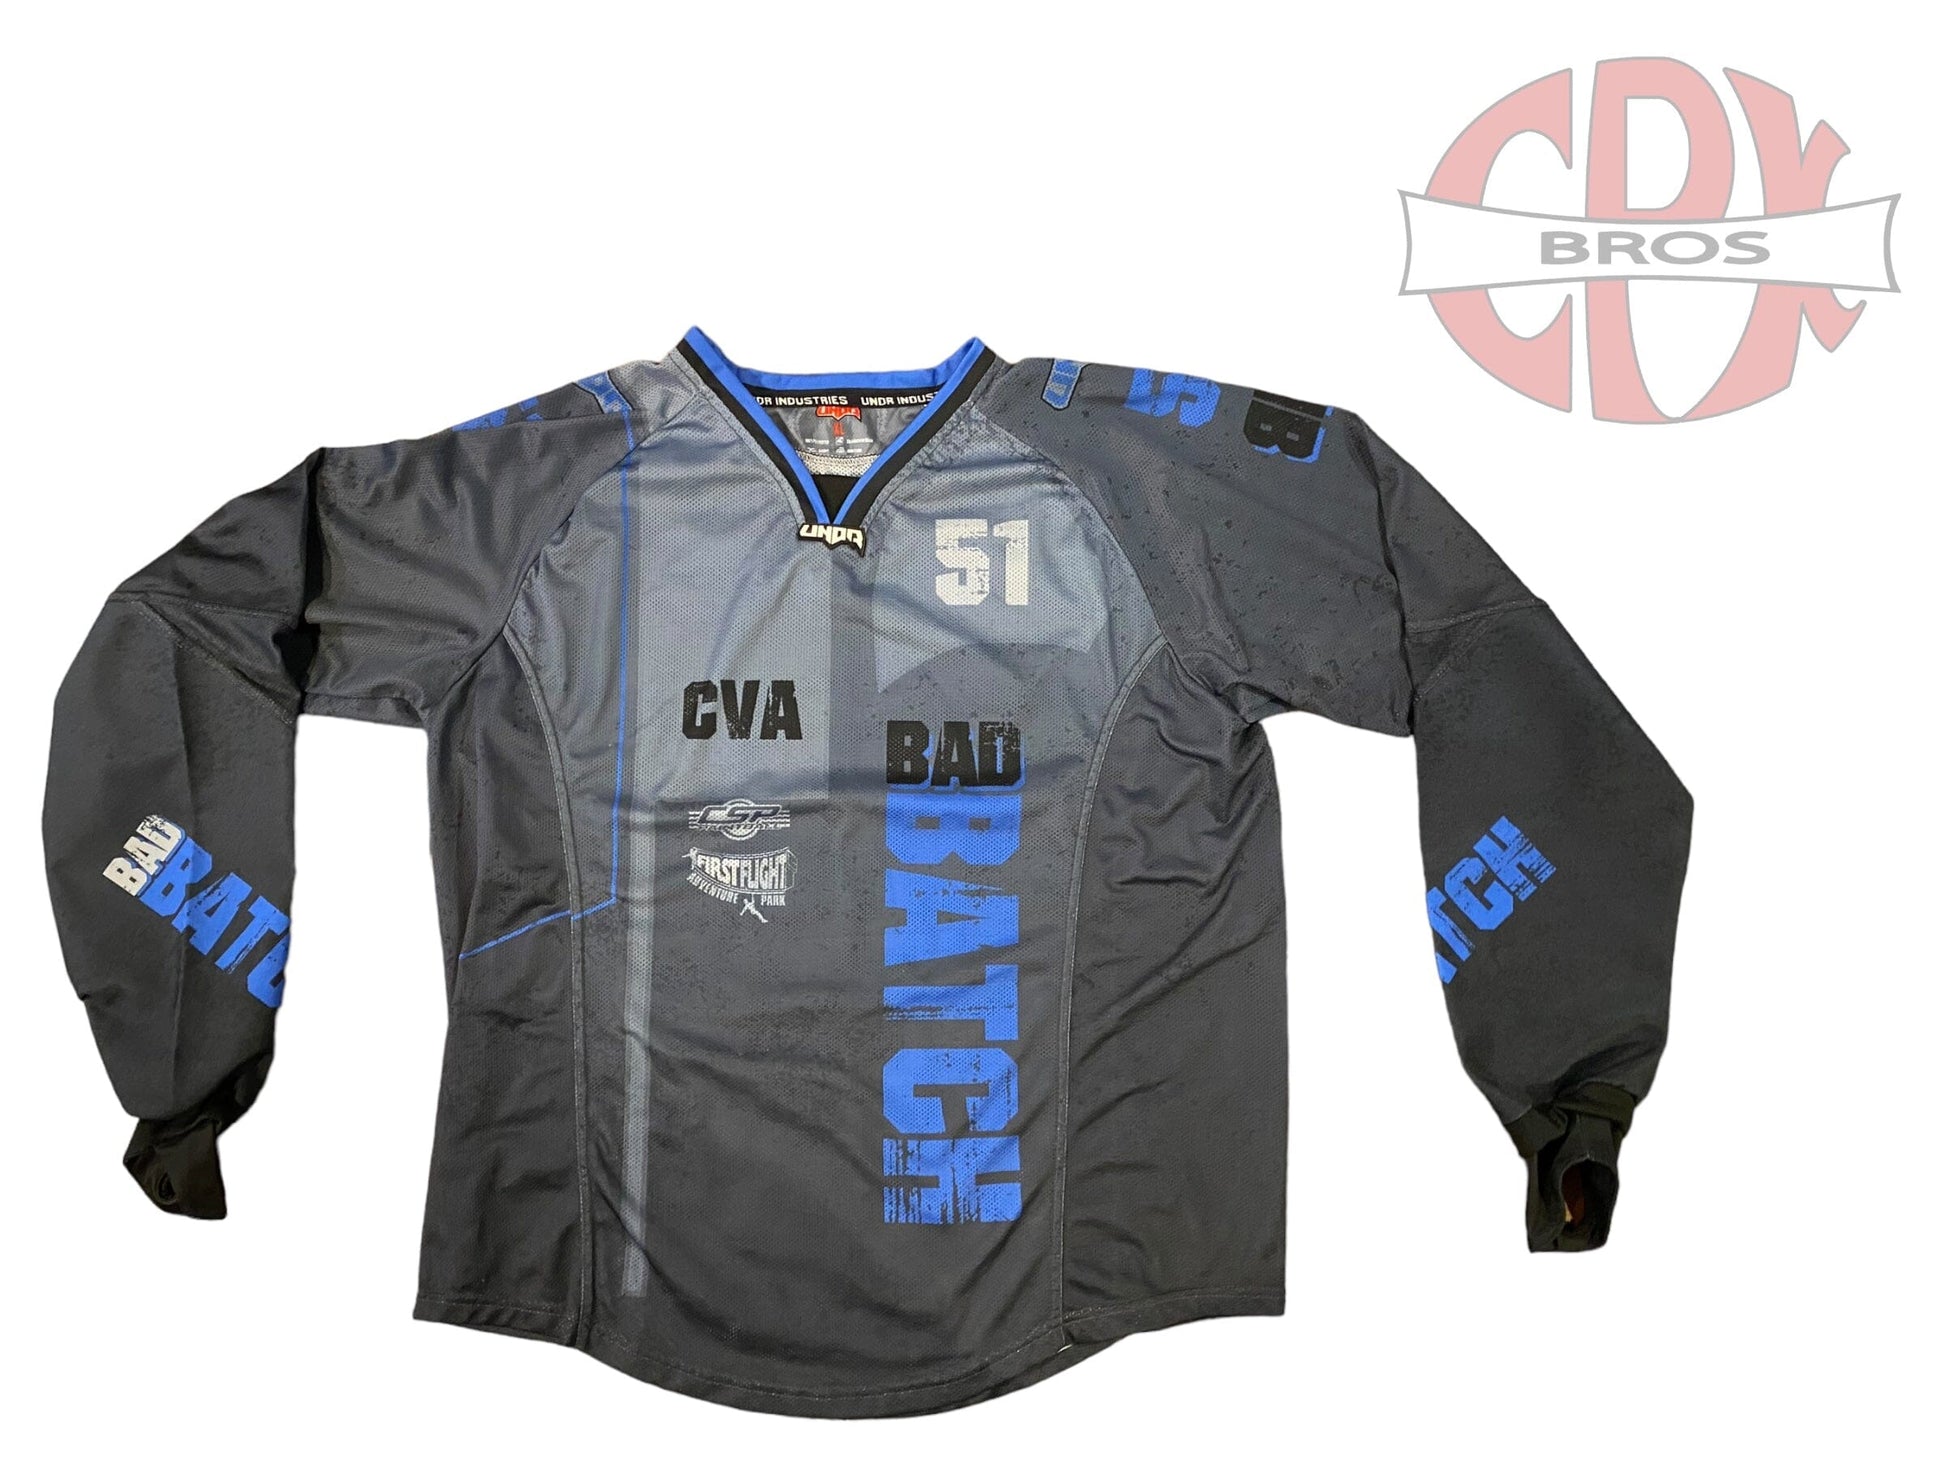 Used UNDR Bad Batch Paintball Jersey size XL Paintball Gun from CPXBrosPaintball Buy/Sell/Trade Paintball Markers, Paintball Hoppers, Paintball Masks, and Hormesis Headbands